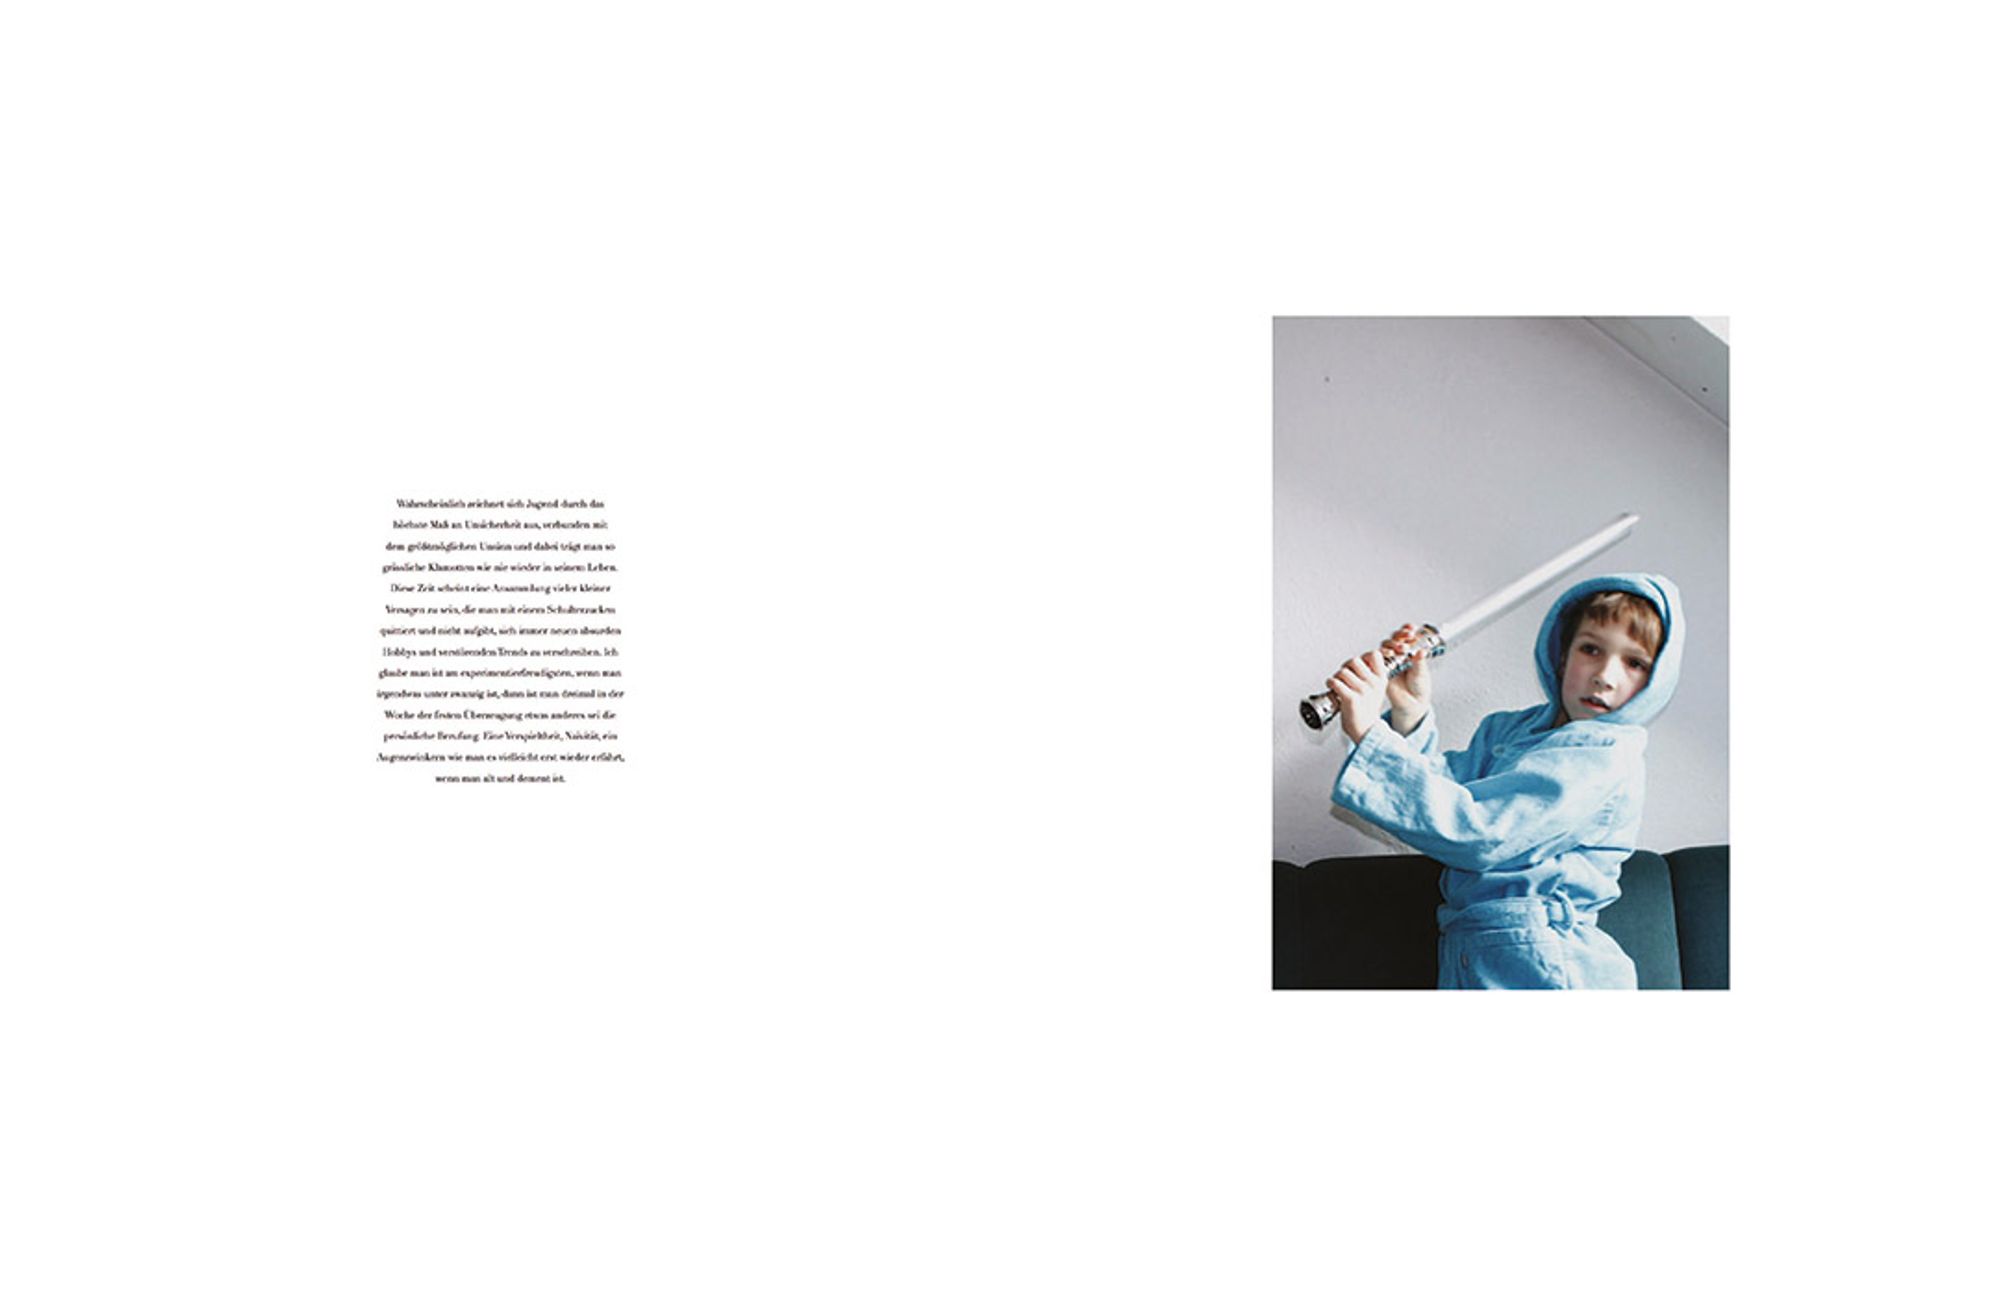 CREATIVE DIRECTION – EDITORIAL DIRECTION ISSUE 02 VOL.C